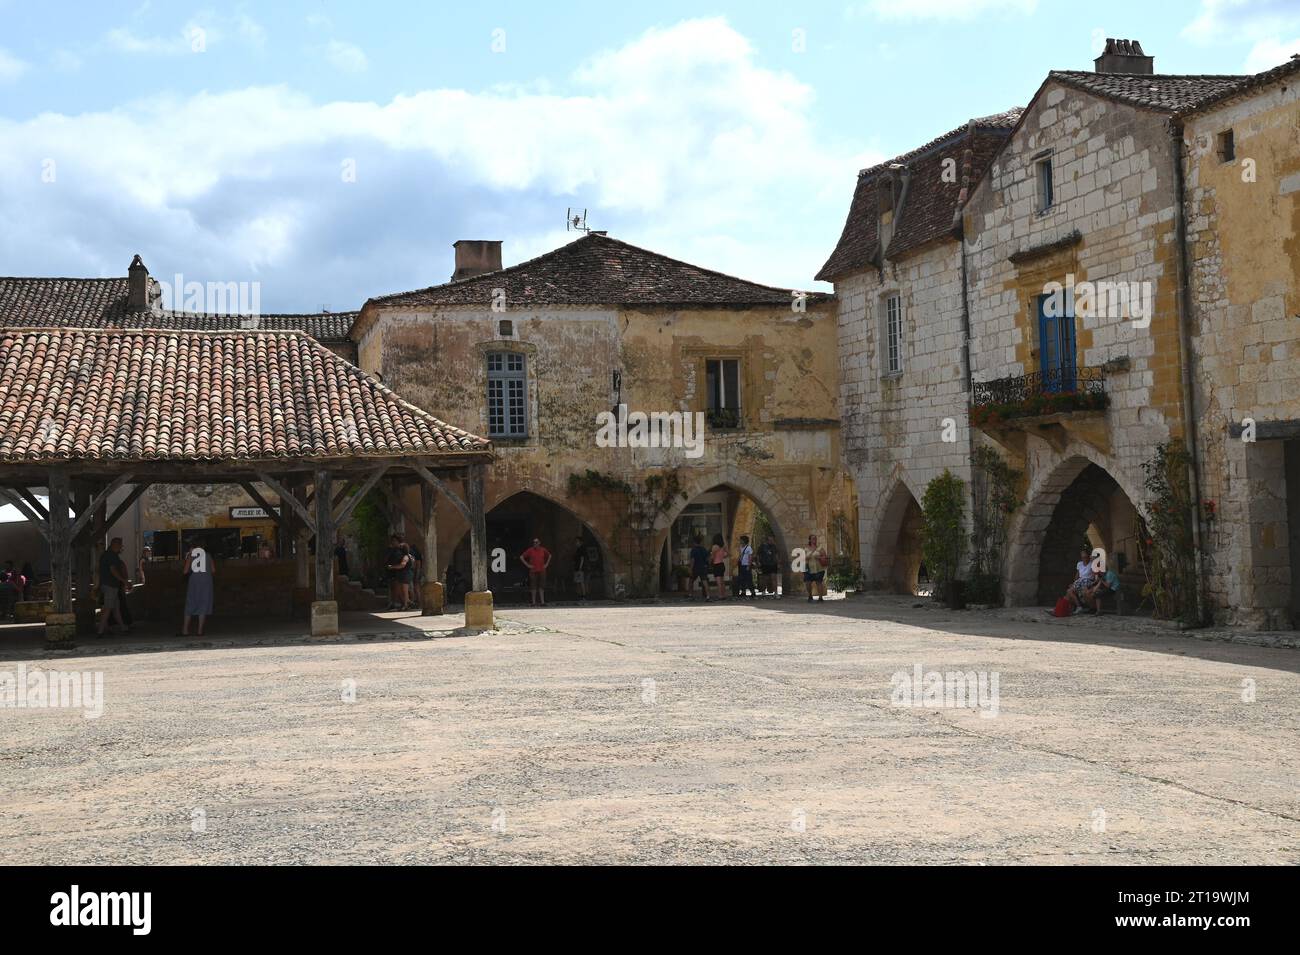 The market square area of the Bastide village of Monpazier in the Dordogne region of France. The bastide was founded in 1284 by Edward1 of England. Stock Photo